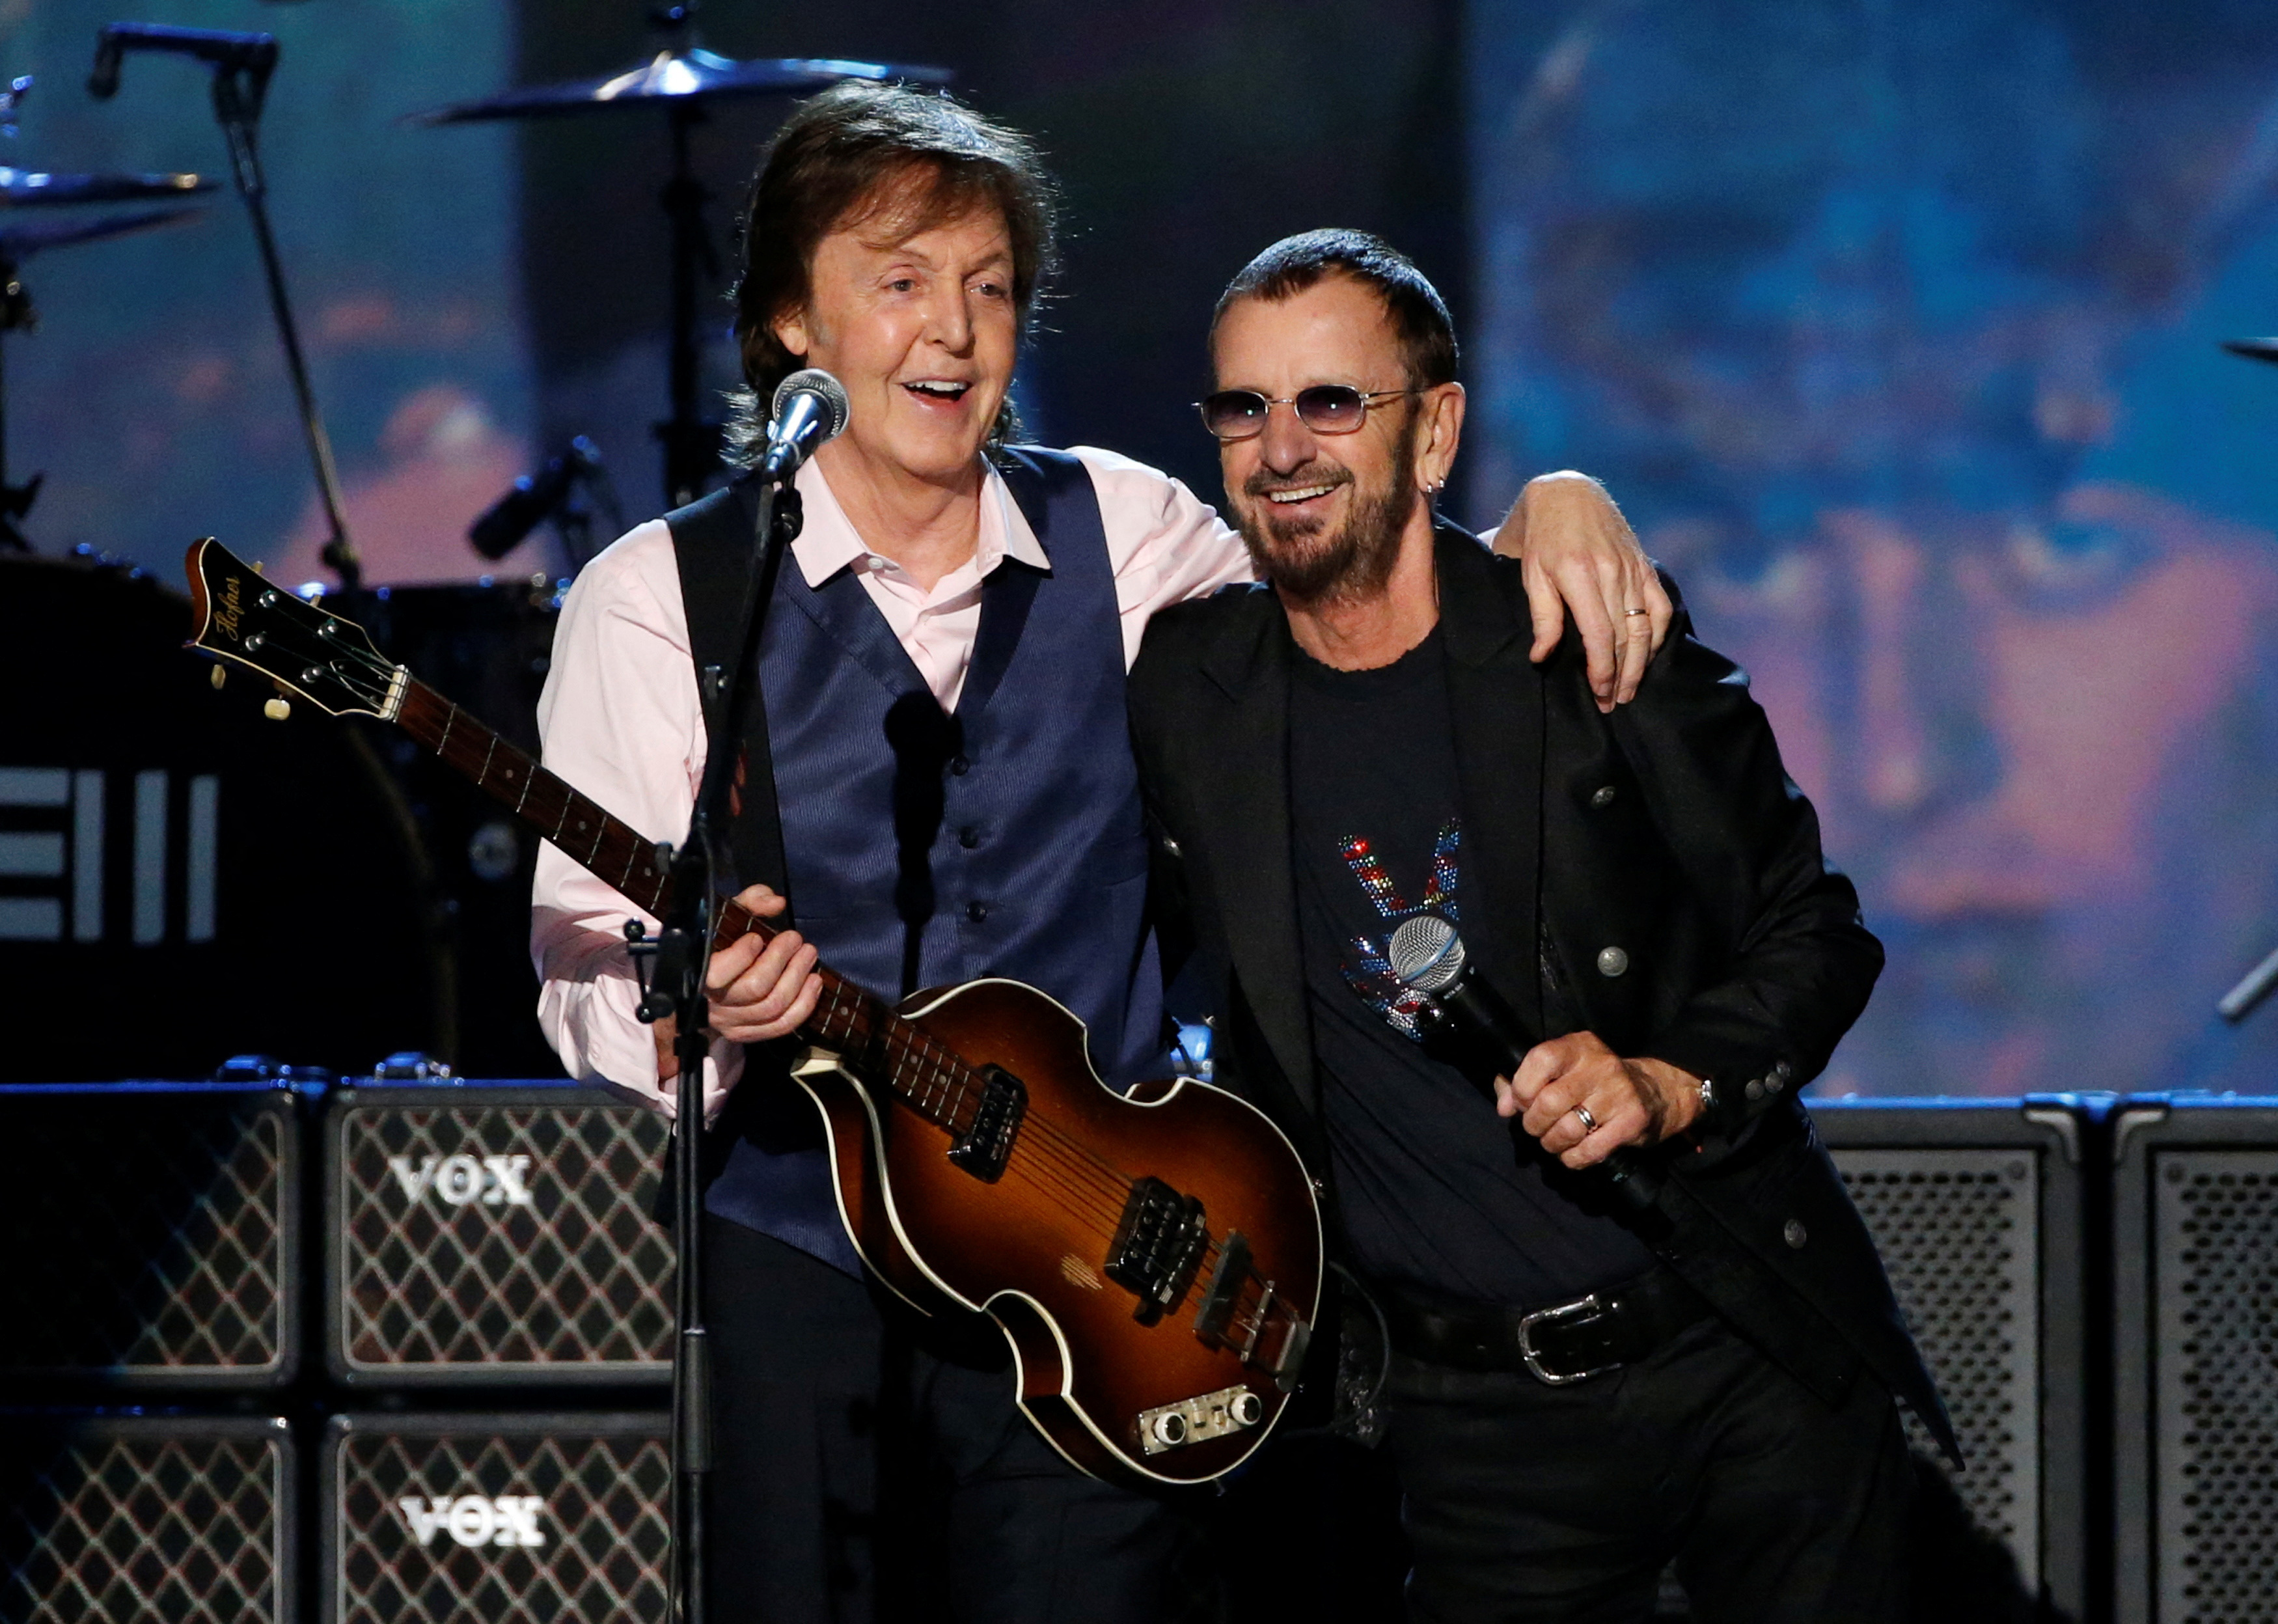 Paul McCartney and Ringo Starr perform during the taping of 